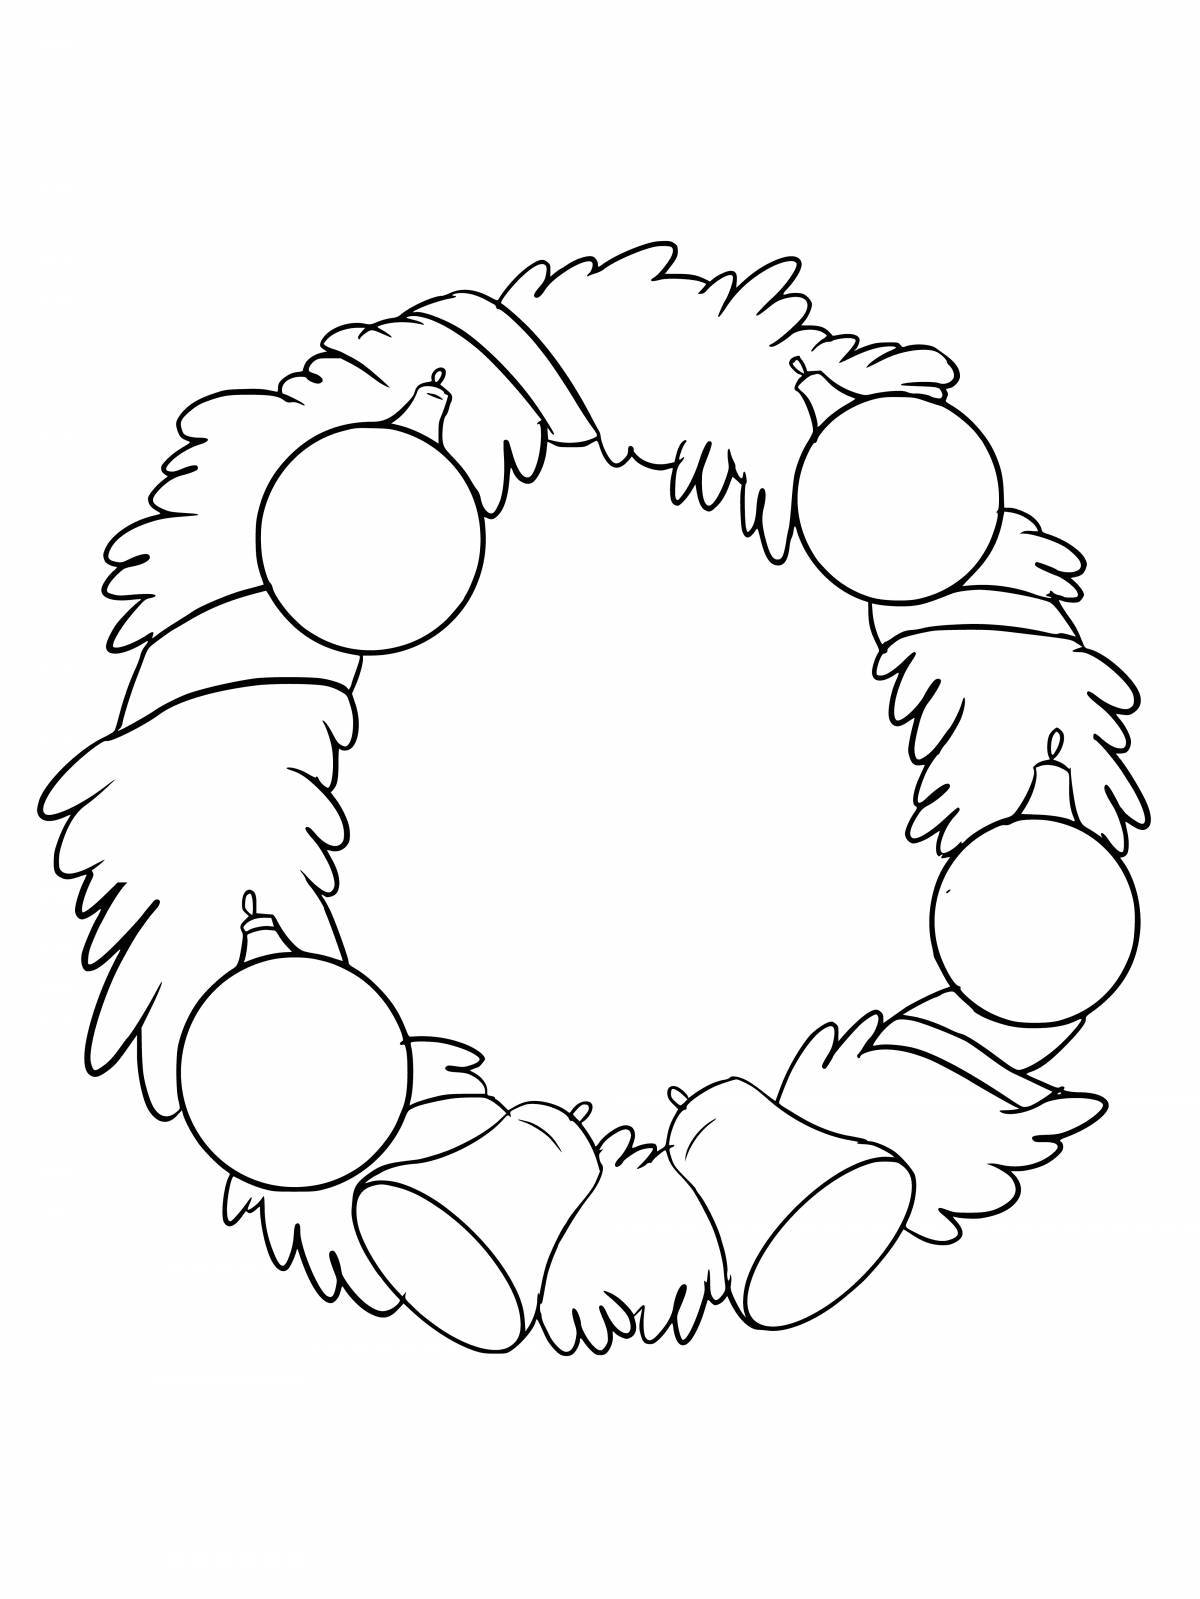 Coloring page delicate Christmas wreath